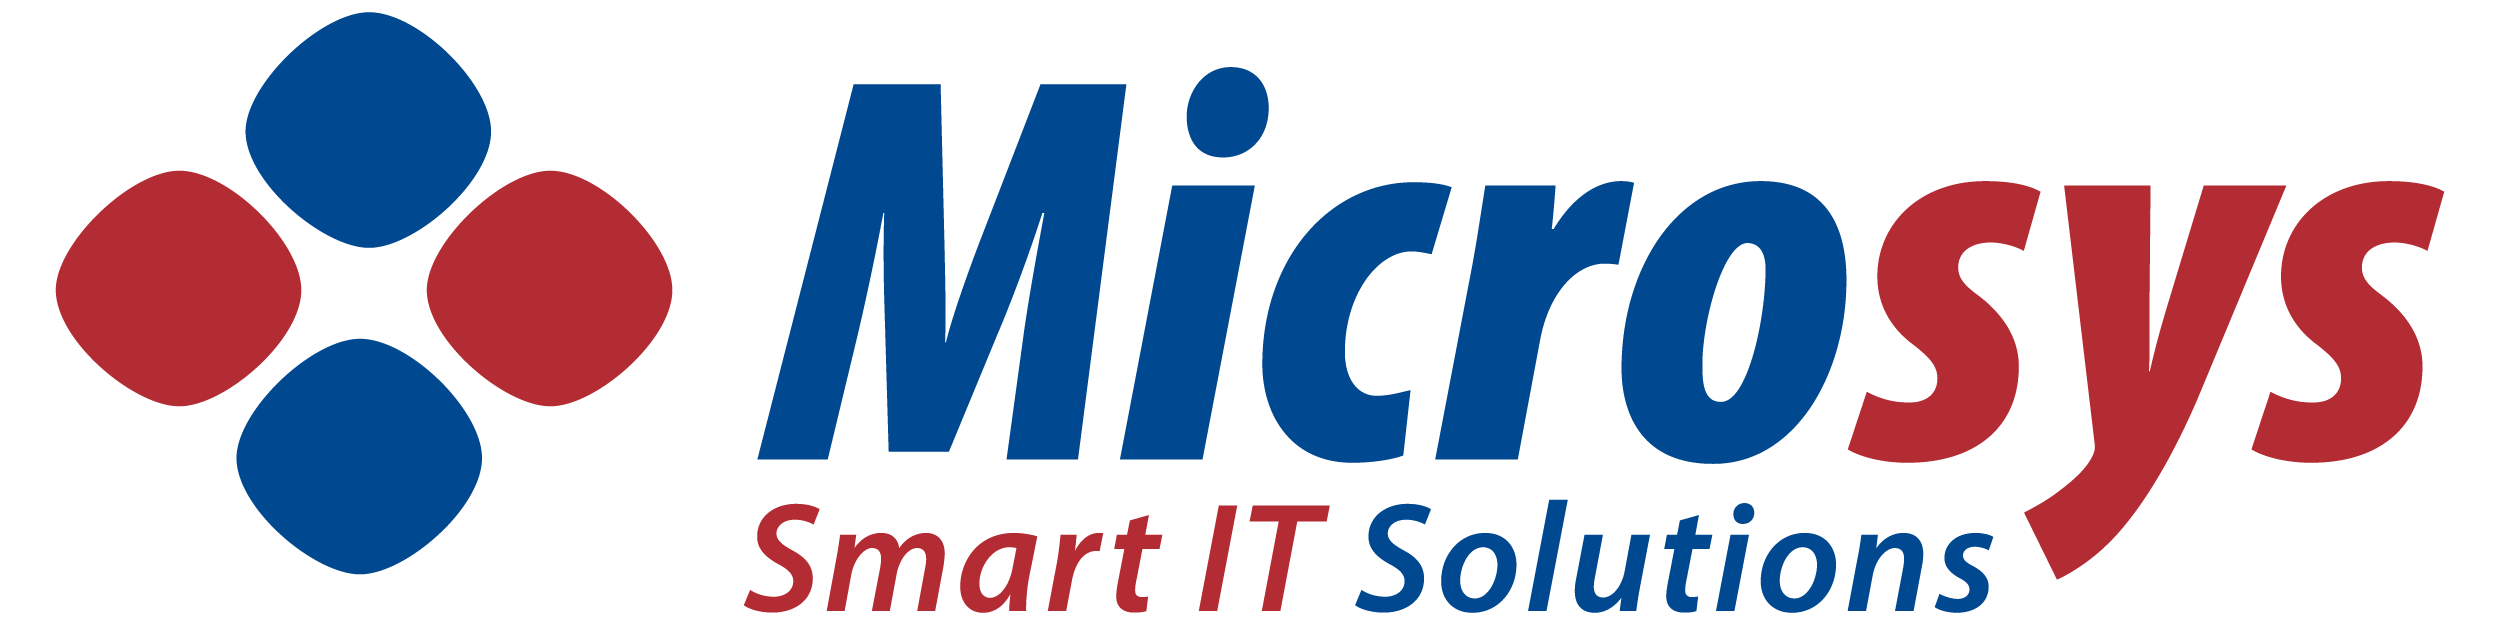 Microsys - Smart IT Solutions